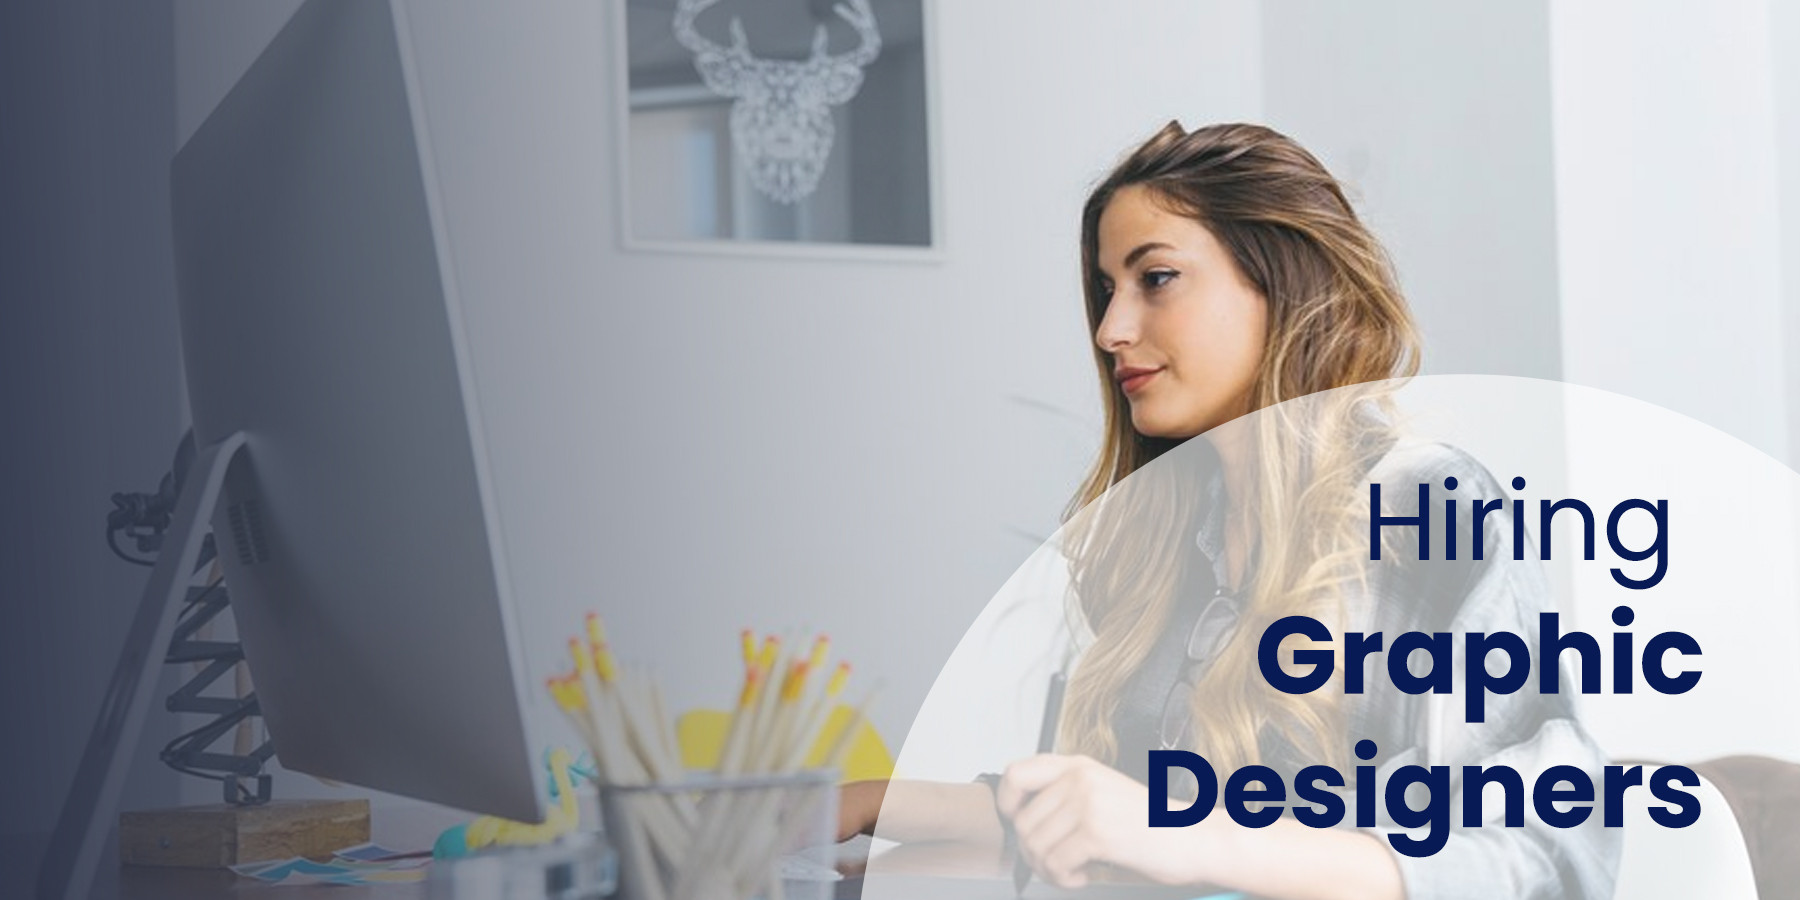 How To Hire an Offshore Graphic Designer by Navigating the Various Graphic Design Fields